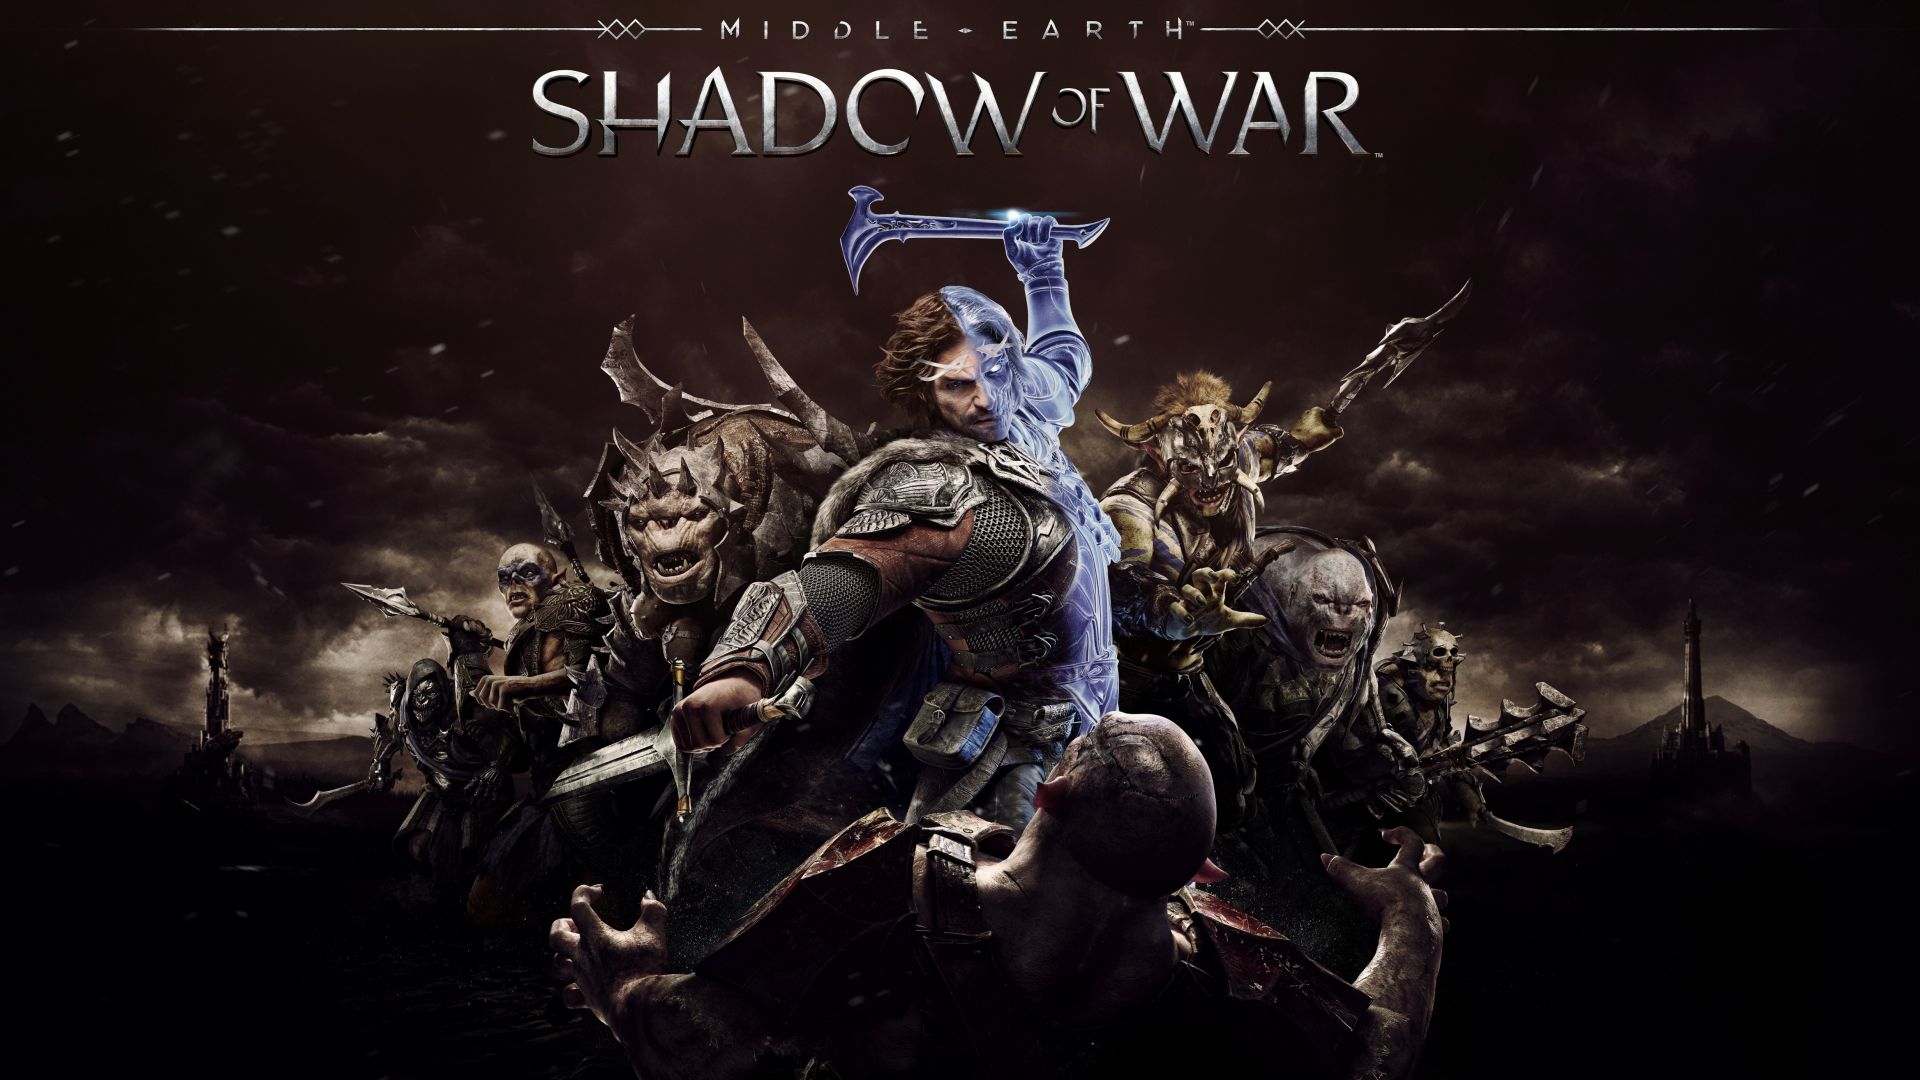 Wallpaper Middle-earth: Shadow of War, 2017 game, cover, 4k